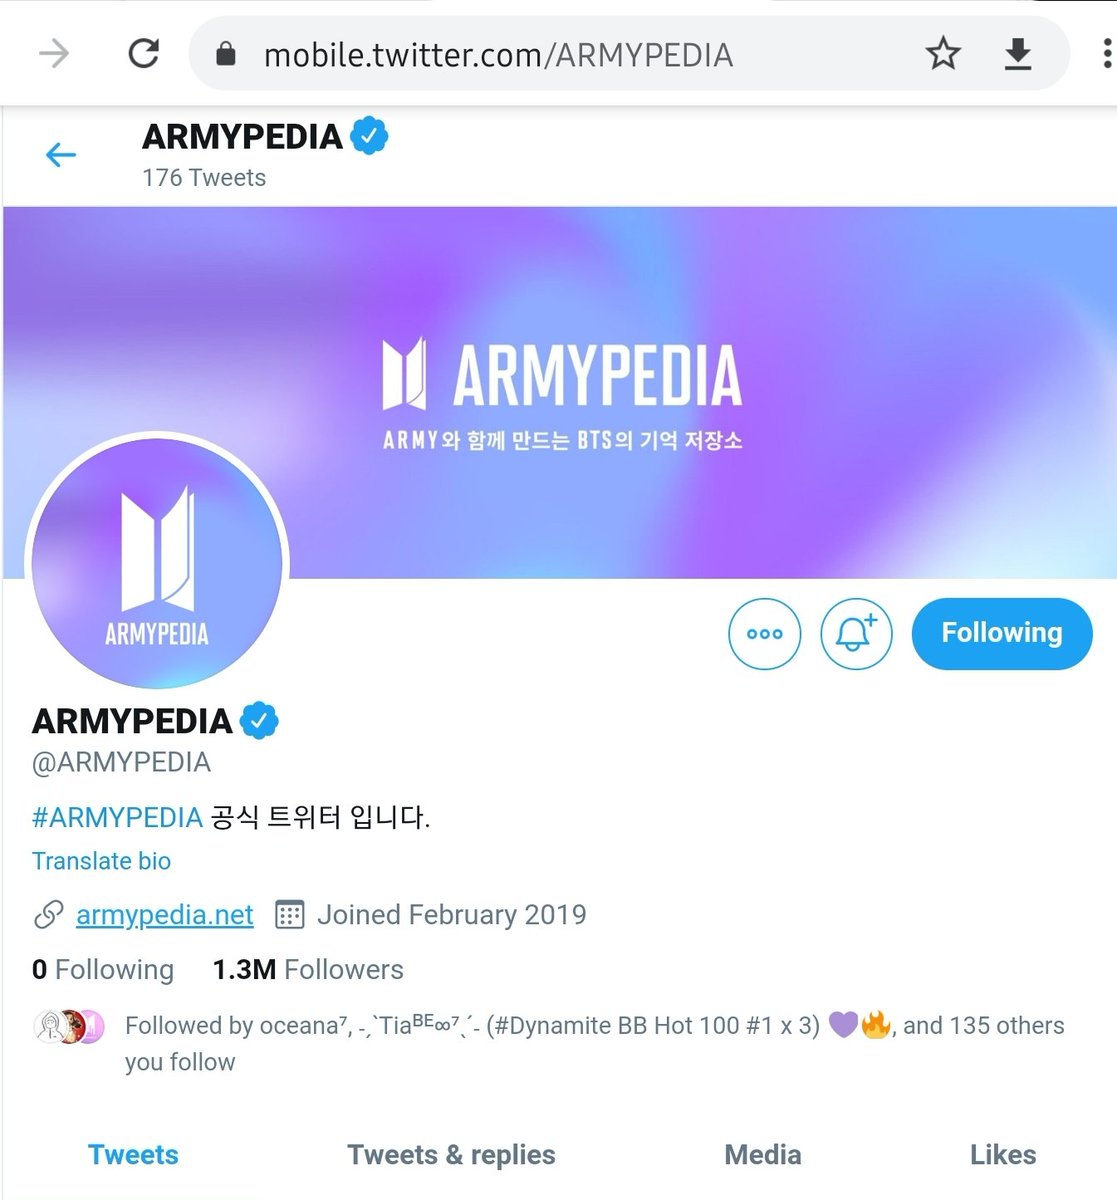 Love a good documentary? -  @amidocumentary BigHit Official ARMYPedia? -  @ARMYPEDIANeed someone to review questionable/inaccurate articles before giving them clicks? -  @BTSPressDataHave Antis to Report? DM  @report_army ! #BTSARMY  @BTS_twt